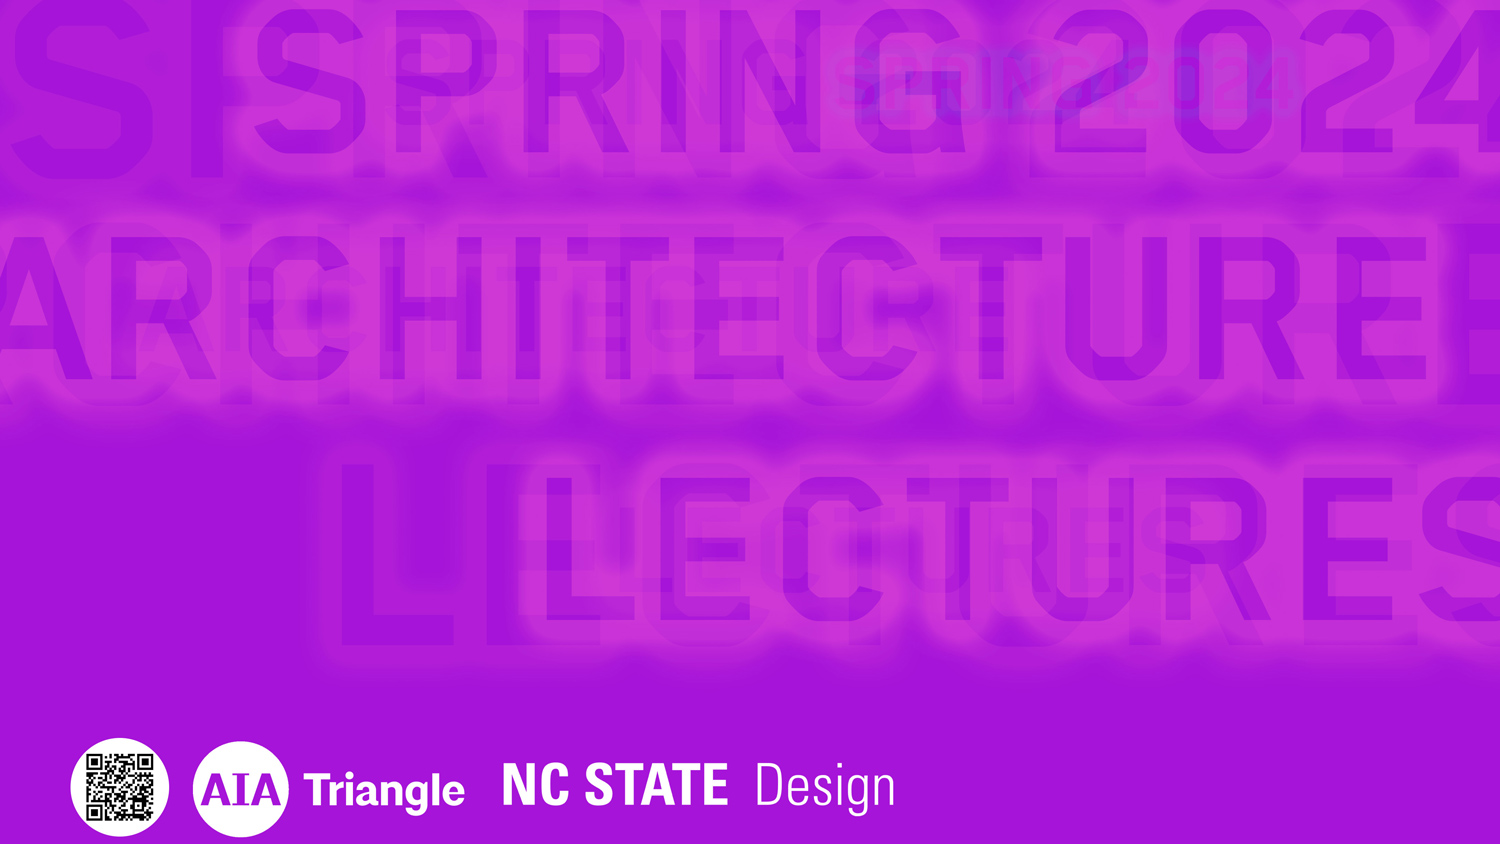 Spring 2022 architecture lecture series